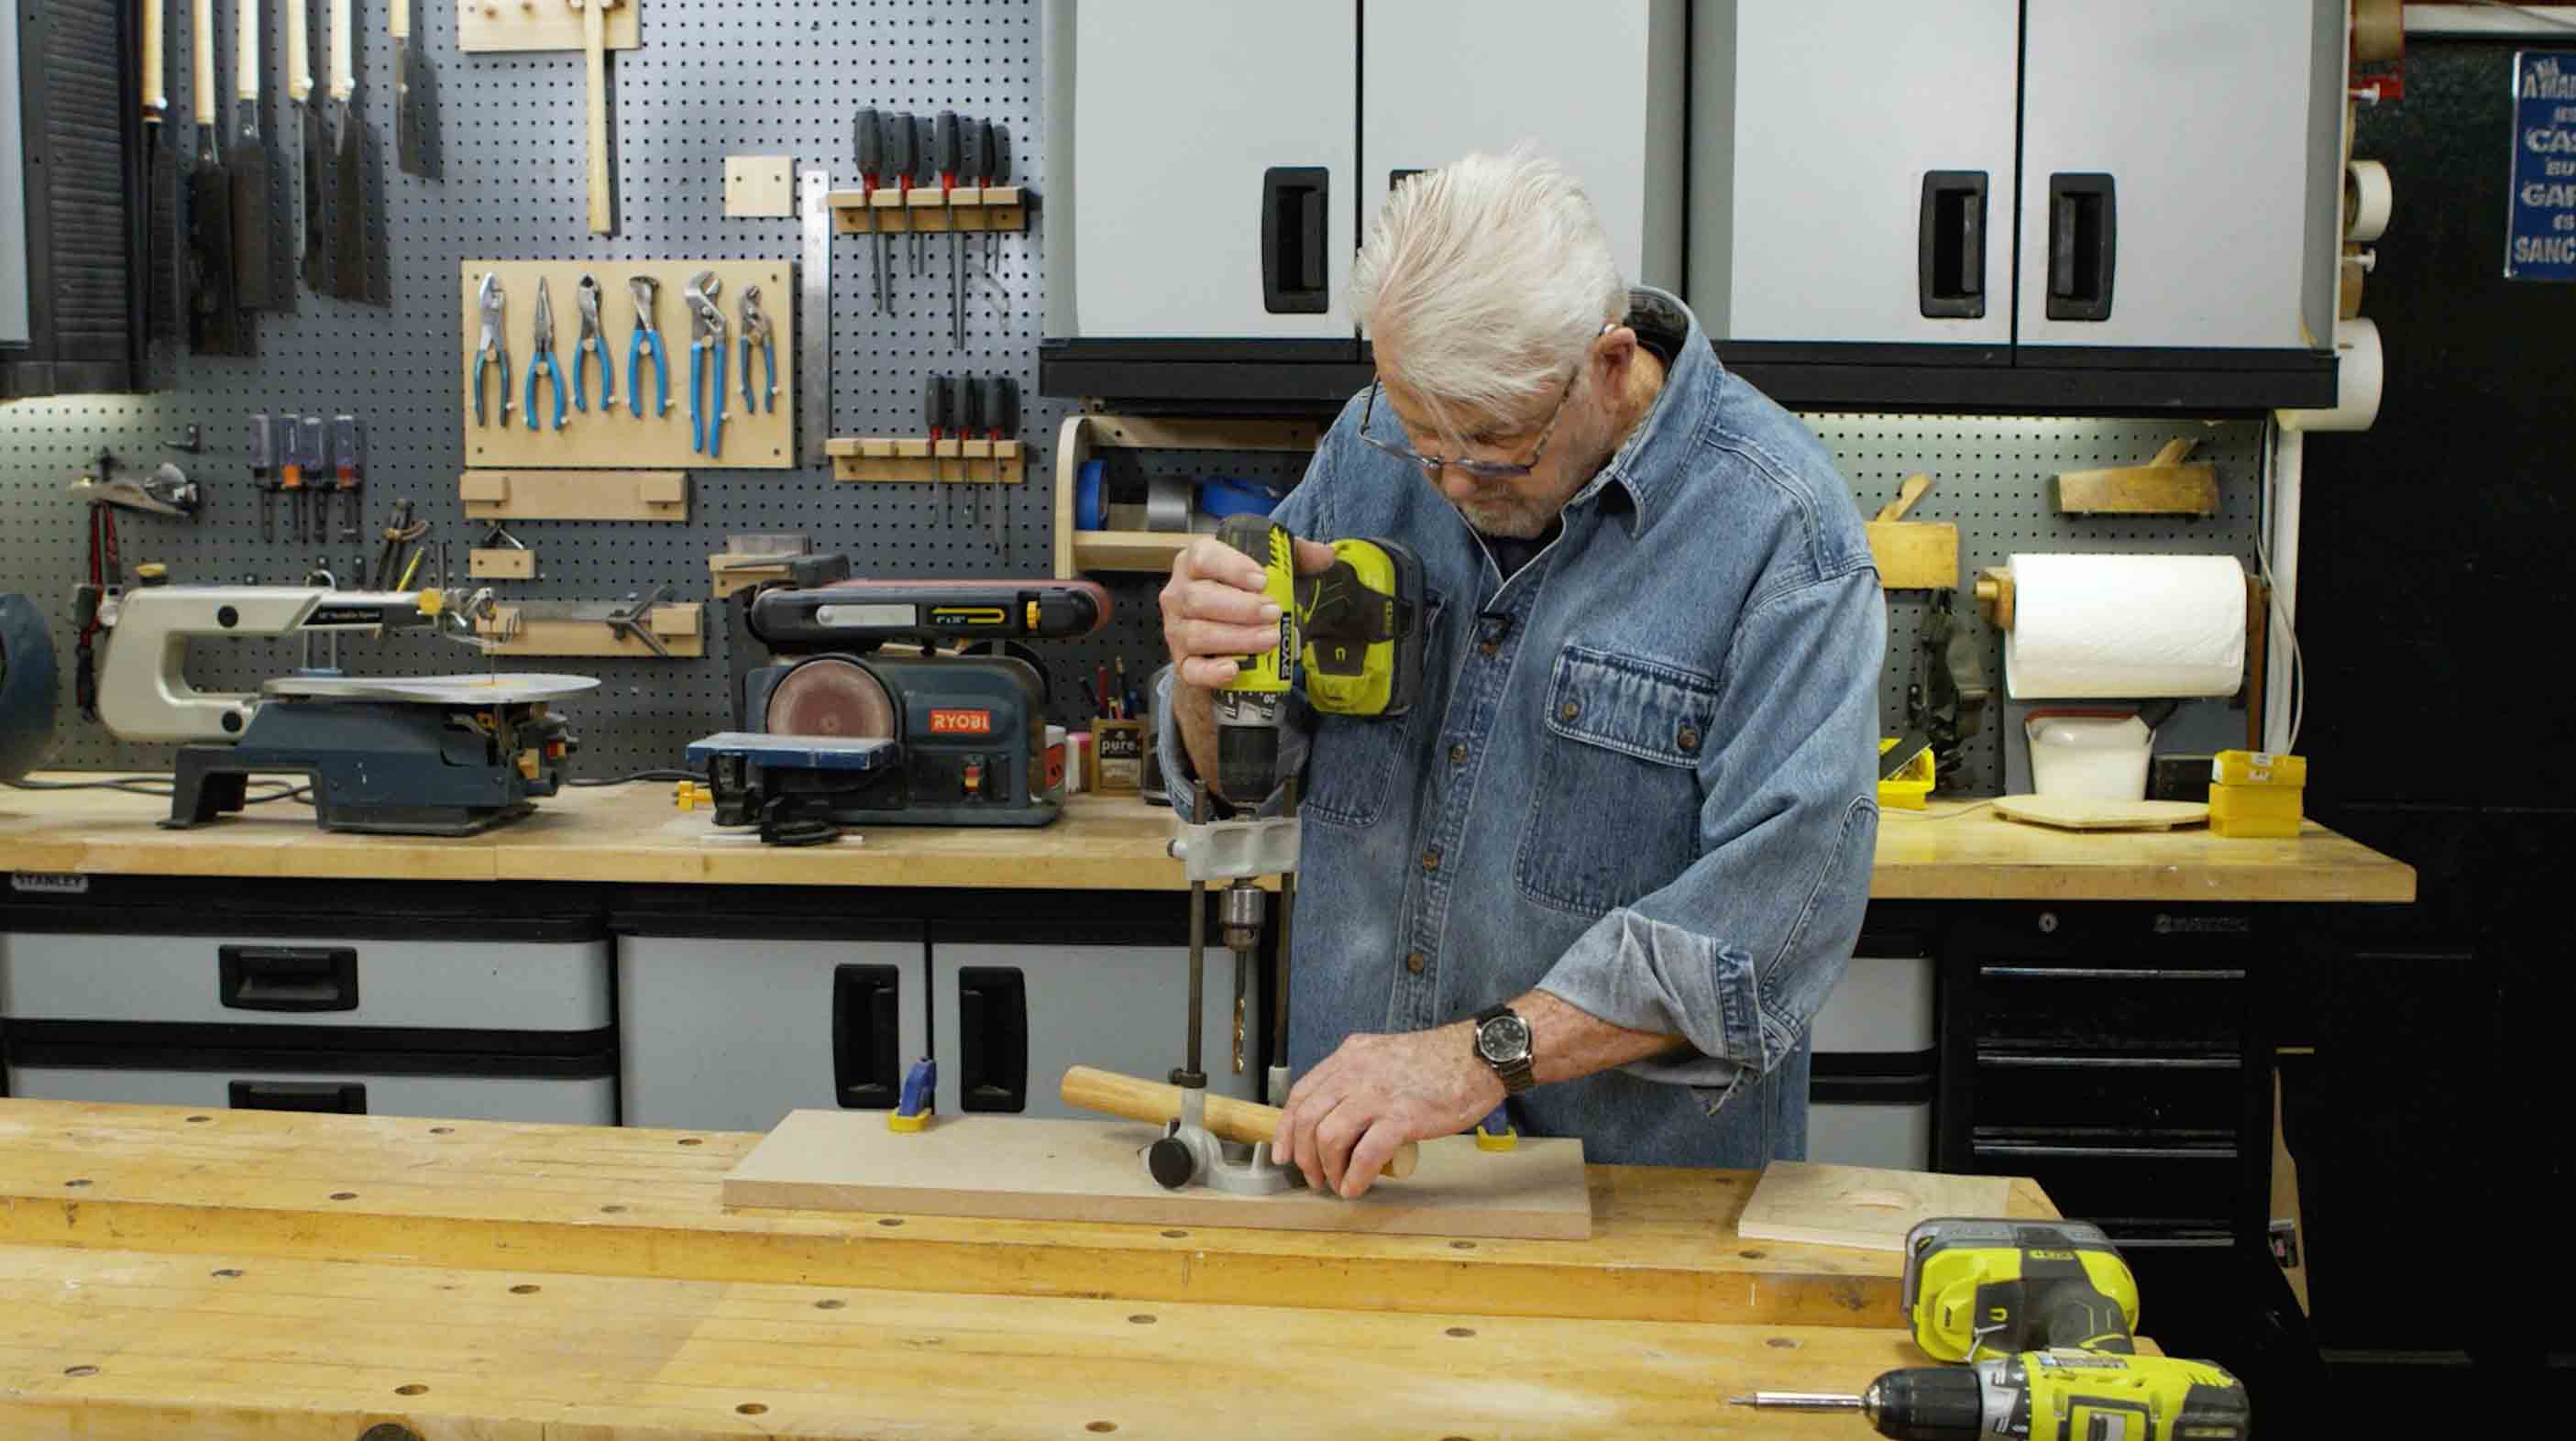 Man uses built in work support to drill into a dowel